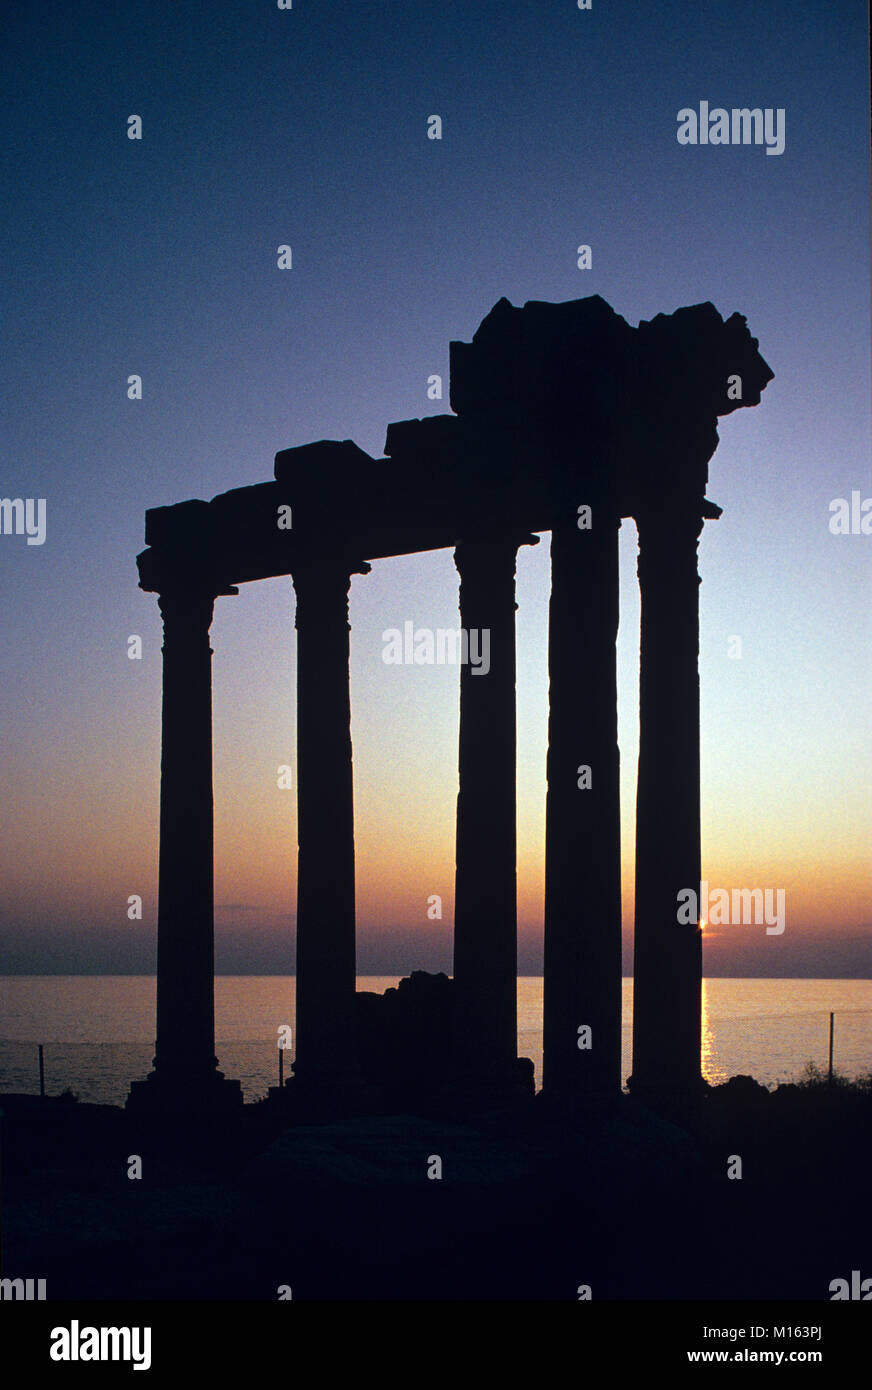 Dusk or Sunset over the Ancient Greek Temple of Apollo (c2nd) in the Remains or Ruins of the Antique Greek City of Side, on the Side Peninsula Overlooking the Mediterranean Sea, Antalya, Turkey Stock Photo